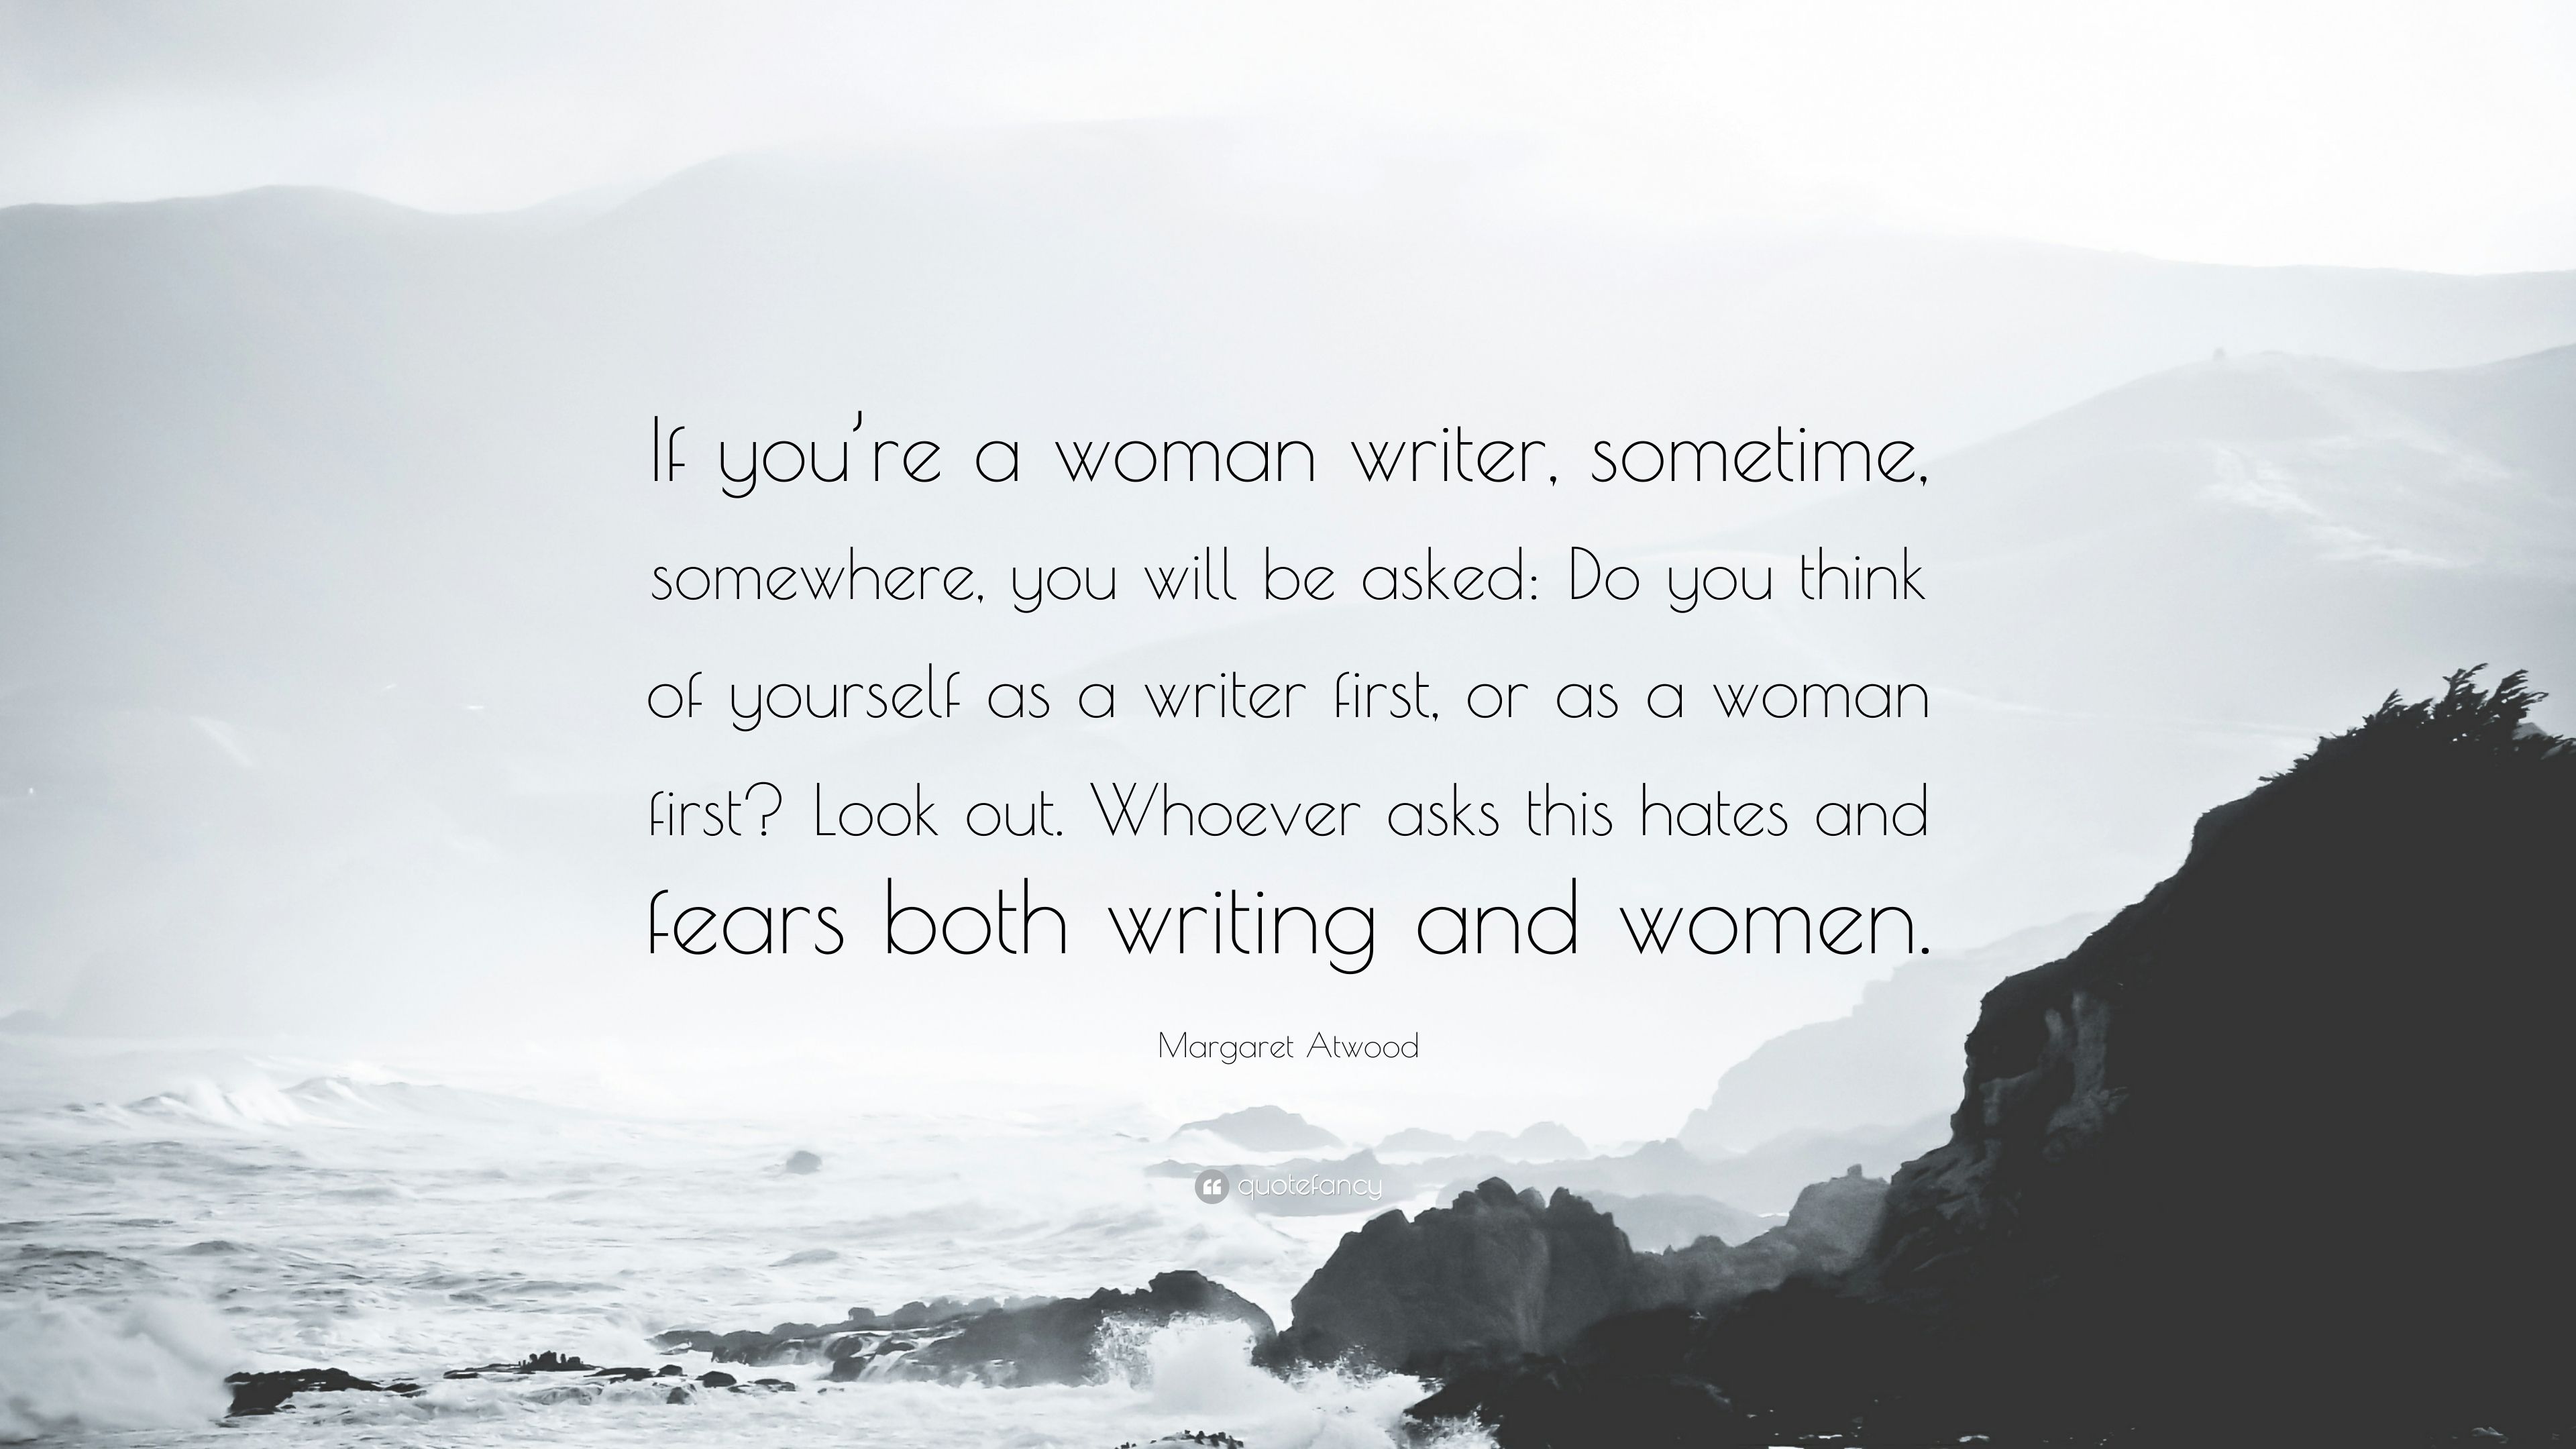 Margaret Atwood Quote: “If you're a woman writer, sometime